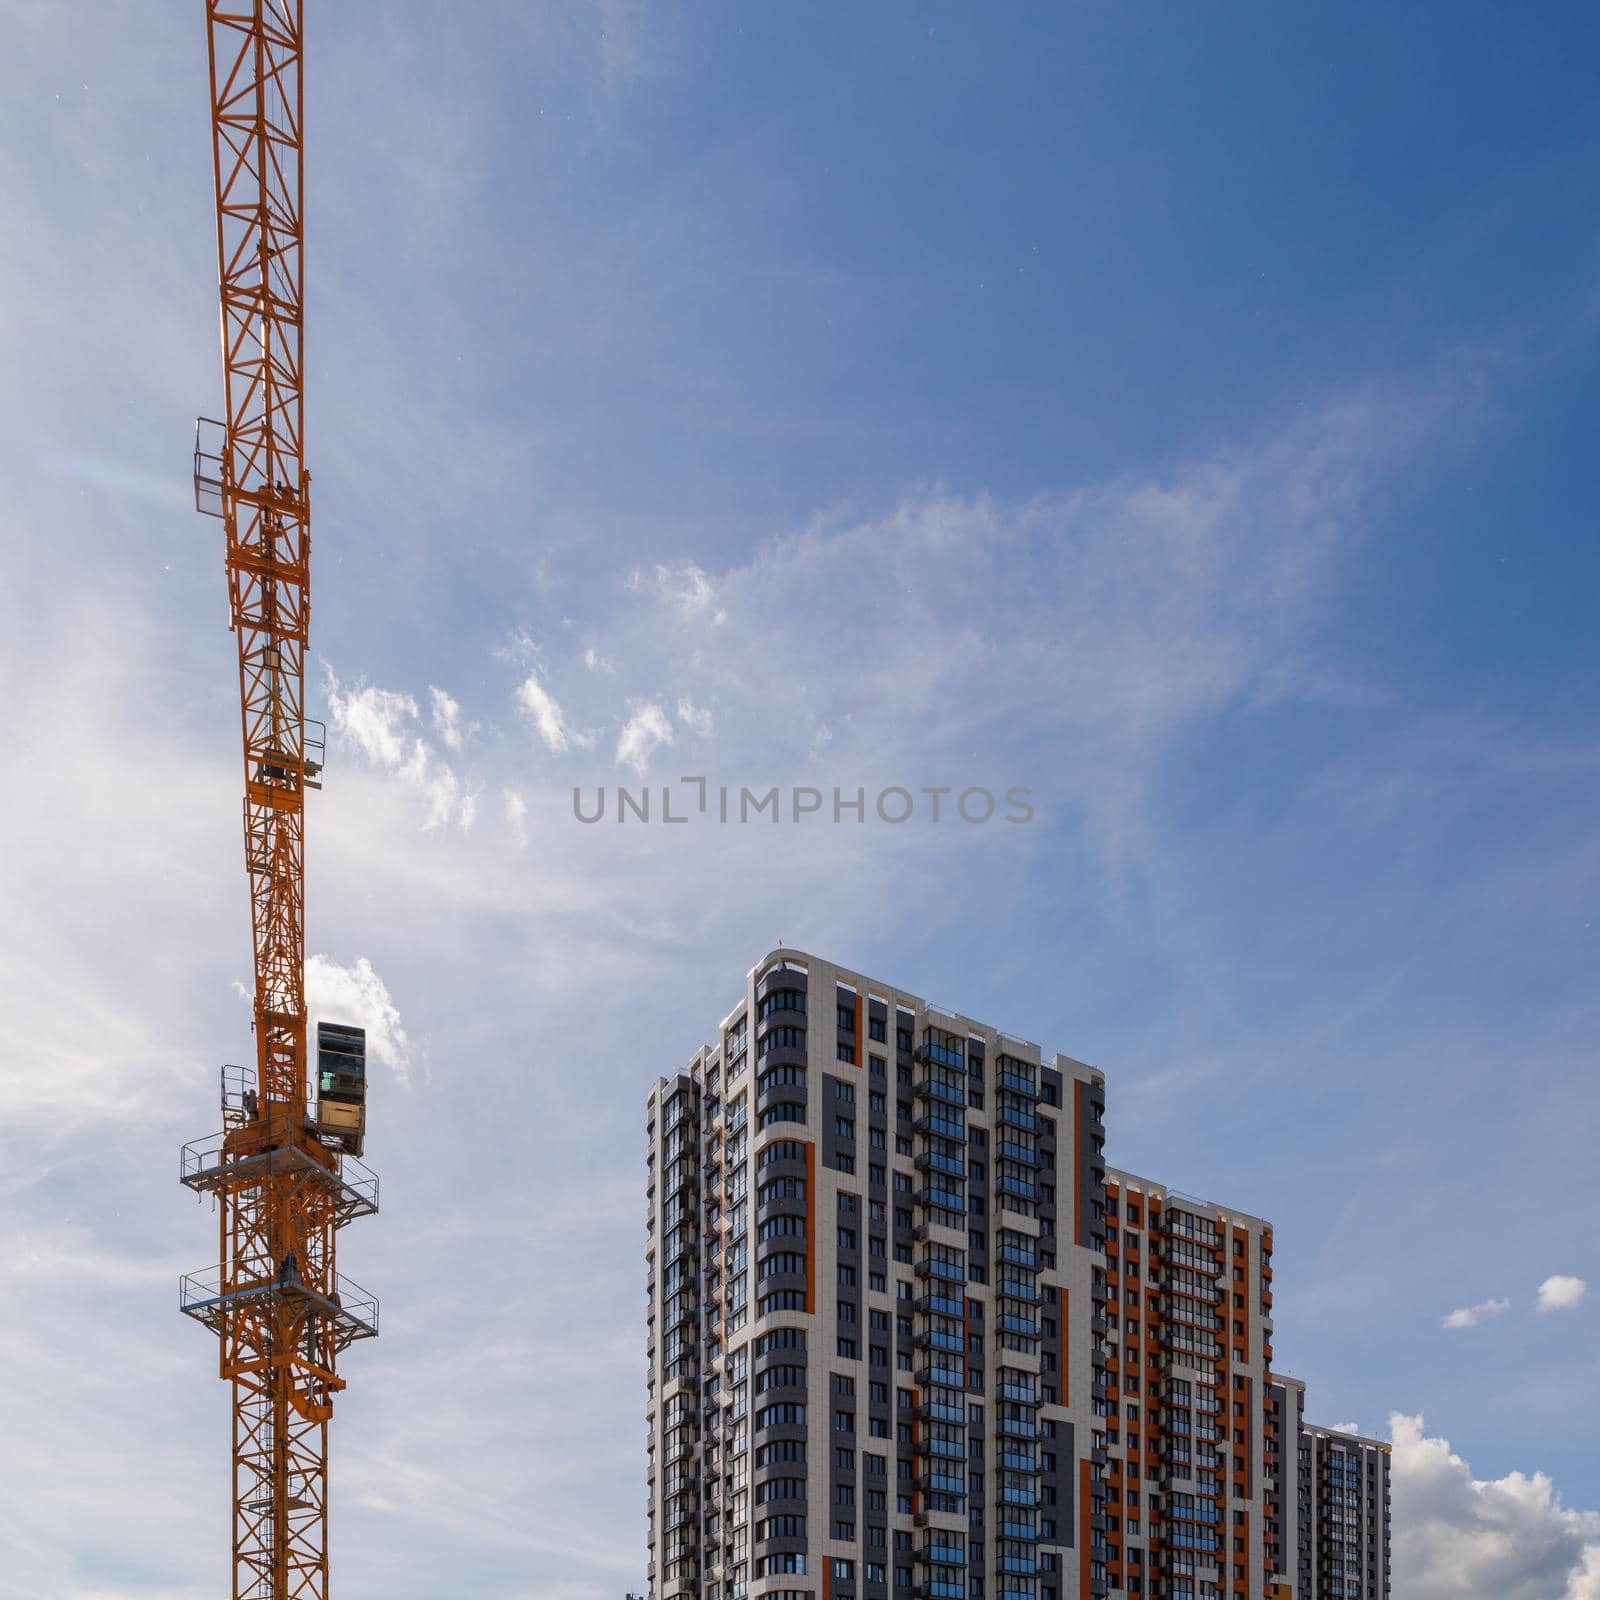 freshly built high rise apartment building near yellow crane on blue sky background with thin feathery clouds by z1b